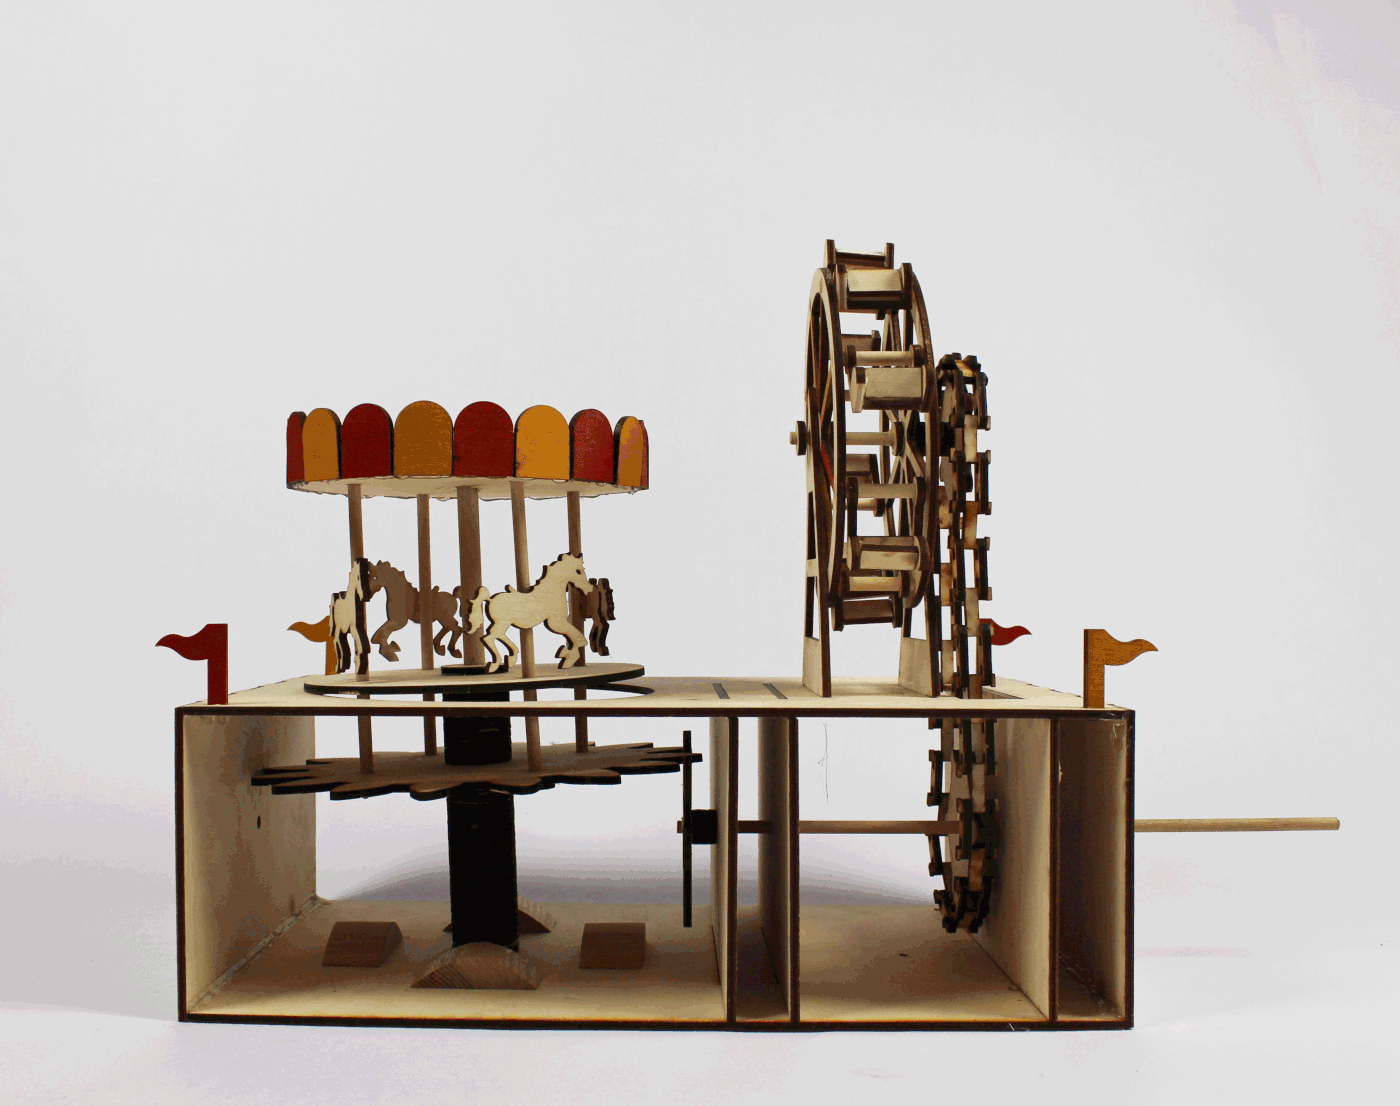 mechanism industrial design  Carnival laser cutting wood toy automata